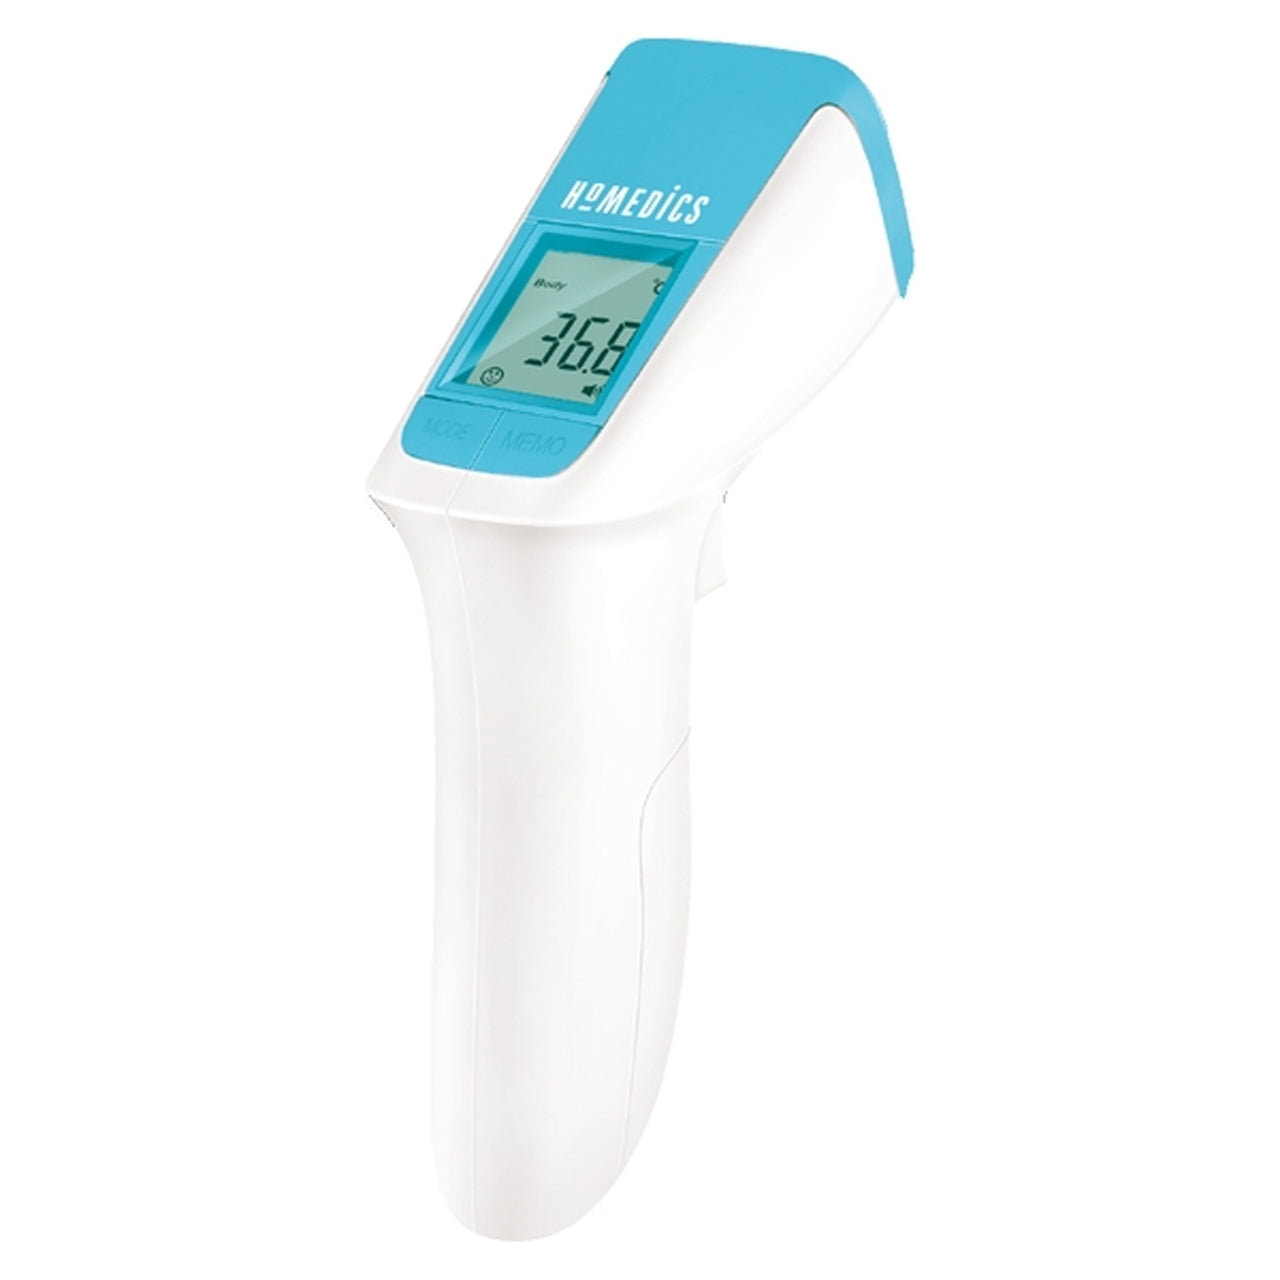 HoMedics TE-350 No Touch Infrared Thermometer